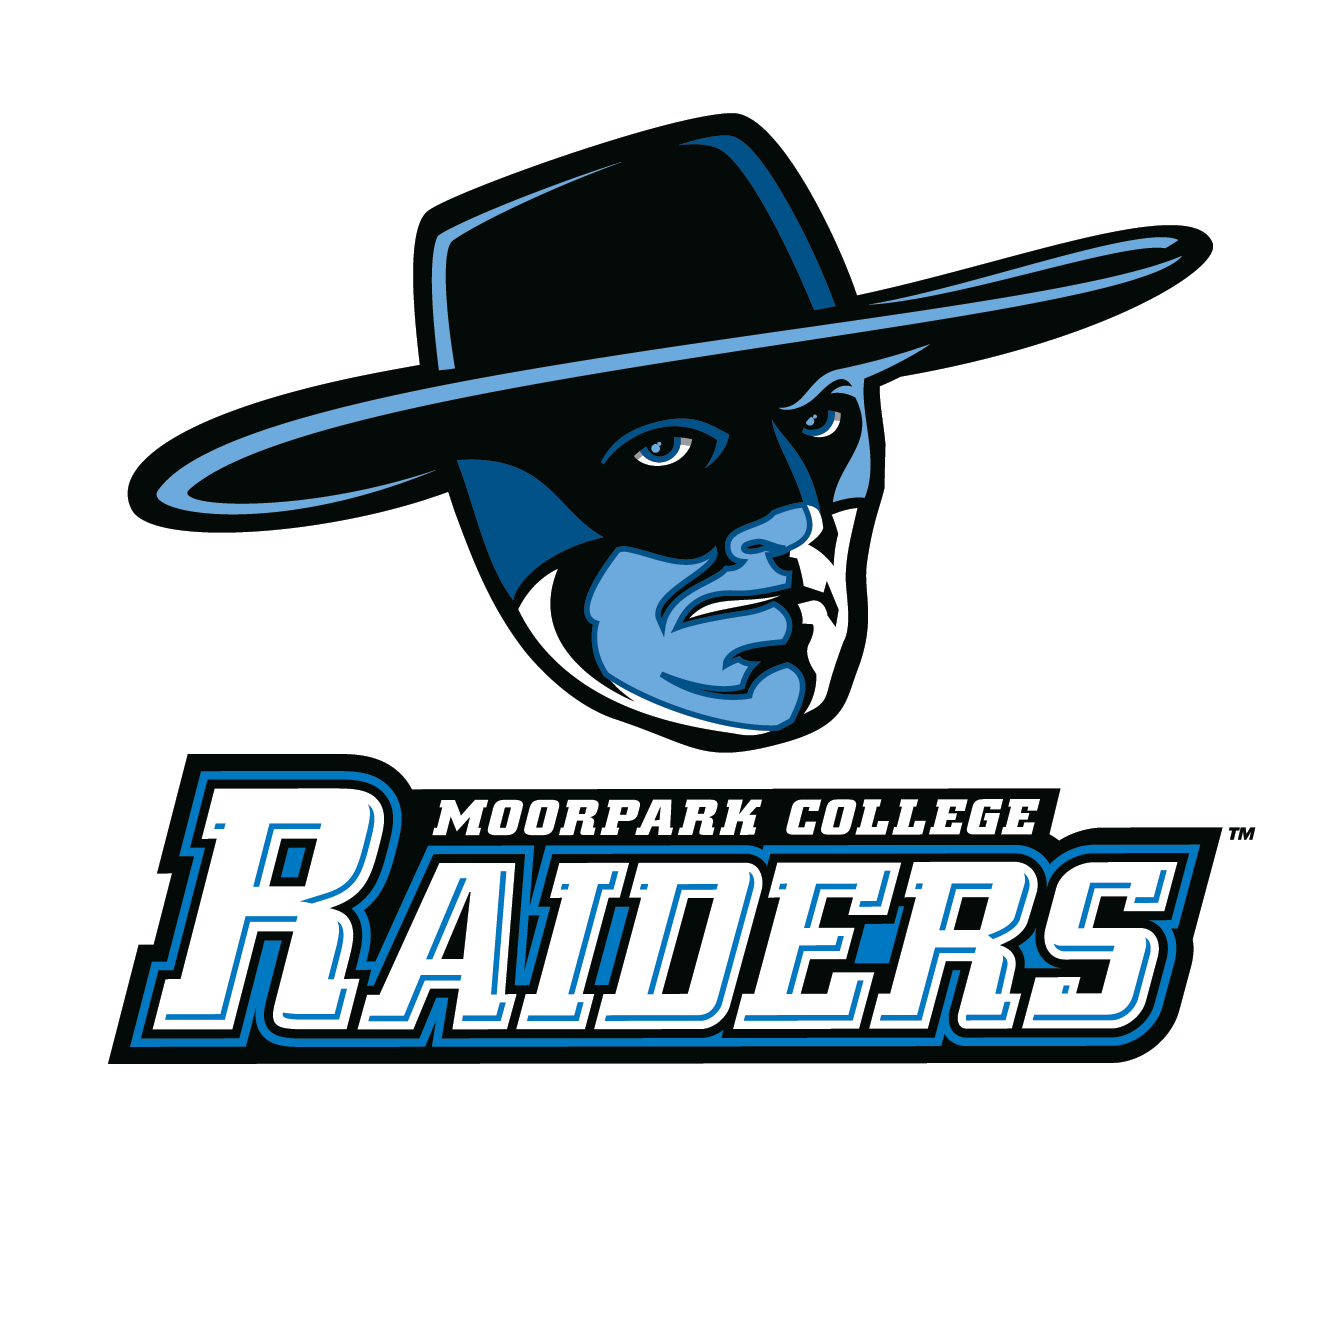 Graphic Logo Image of the Moorpark College Raider with text that reads Moorpark College Raiders. By Clicking on the image, the user will be redirected to the Athletics Website for Moorpark College